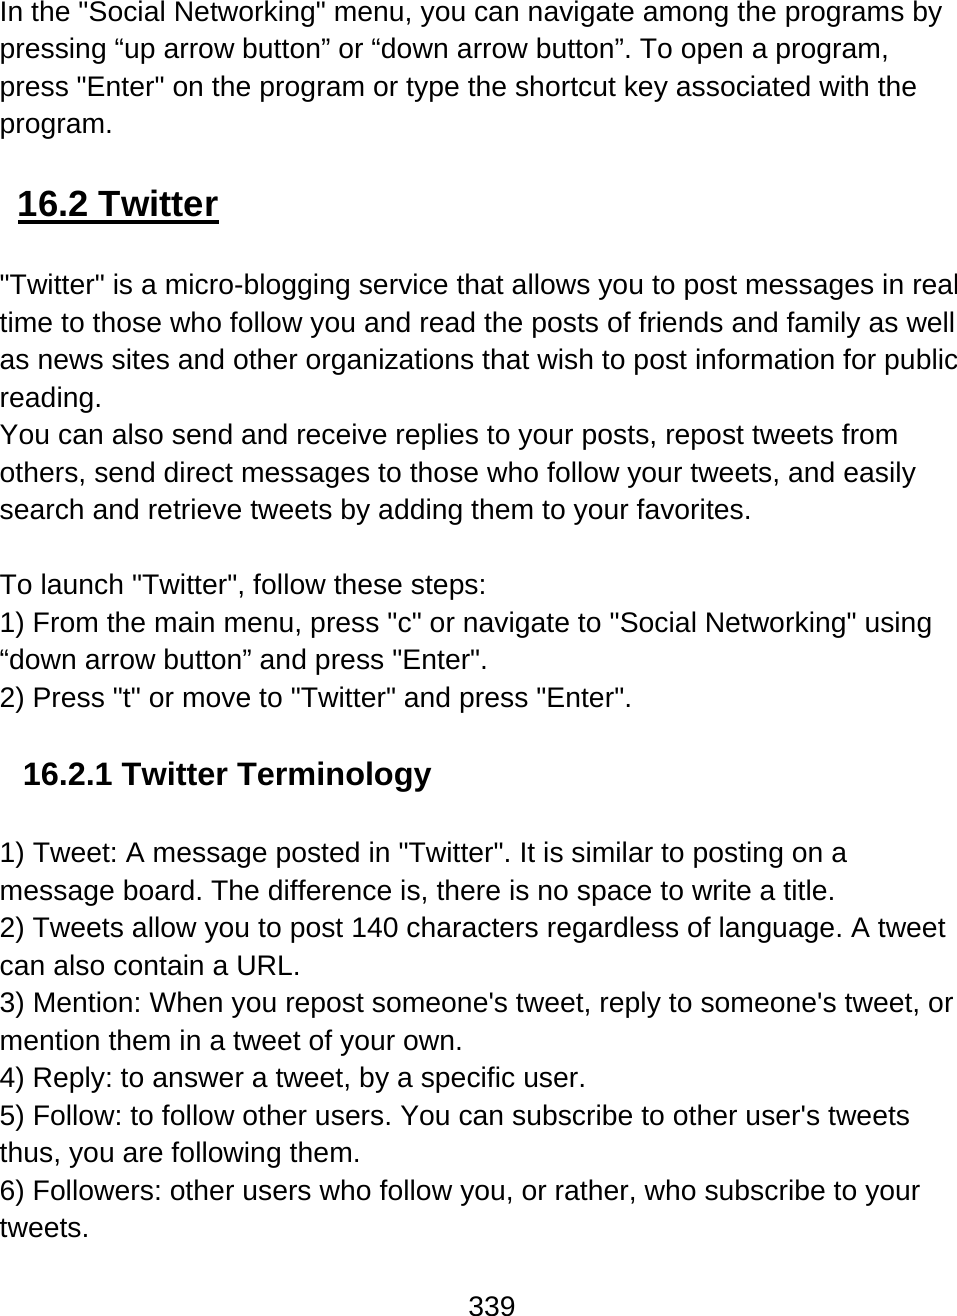 339  In the &quot;Social Networking&quot; menu, you can navigate among the programs by pressing “up arrow button” or “down arrow button”. To open a program, press &quot;Enter&quot; on the program or type the shortcut key associated with the program.   16.2 Twitter  &quot;Twitter&quot; is a micro-blogging service that allows you to post messages in real time to those who follow you and read the posts of friends and family as well as news sites and other organizations that wish to post information for public reading.  You can also send and receive replies to your posts, repost tweets from others, send direct messages to those who follow your tweets, and easily search and retrieve tweets by adding them to your favorites.   To launch &quot;Twitter&quot;, follow these steps: 1) From the main menu, press &quot;c&quot; or navigate to &quot;Social Networking&quot; using “down arrow button” and press &quot;Enter&quot;.  2) Press &quot;t&quot; or move to &quot;Twitter&quot; and press &quot;Enter&quot;.  16.2.1 Twitter Terminology  1) Tweet: A message posted in &quot;Twitter&quot;. It is similar to posting on a message board. The difference is, there is no space to write a title.  2) Tweets allow you to post 140 characters regardless of language. A tweet can also contain a URL.  3) Mention: When you repost someone&apos;s tweet, reply to someone&apos;s tweet, or mention them in a tweet of your own.  4) Reply: to answer a tweet, by a specific user.  5) Follow: to follow other users. You can subscribe to other user&apos;s tweets thus, you are following them. 6) Followers: other users who follow you, or rather, who subscribe to your tweets.  